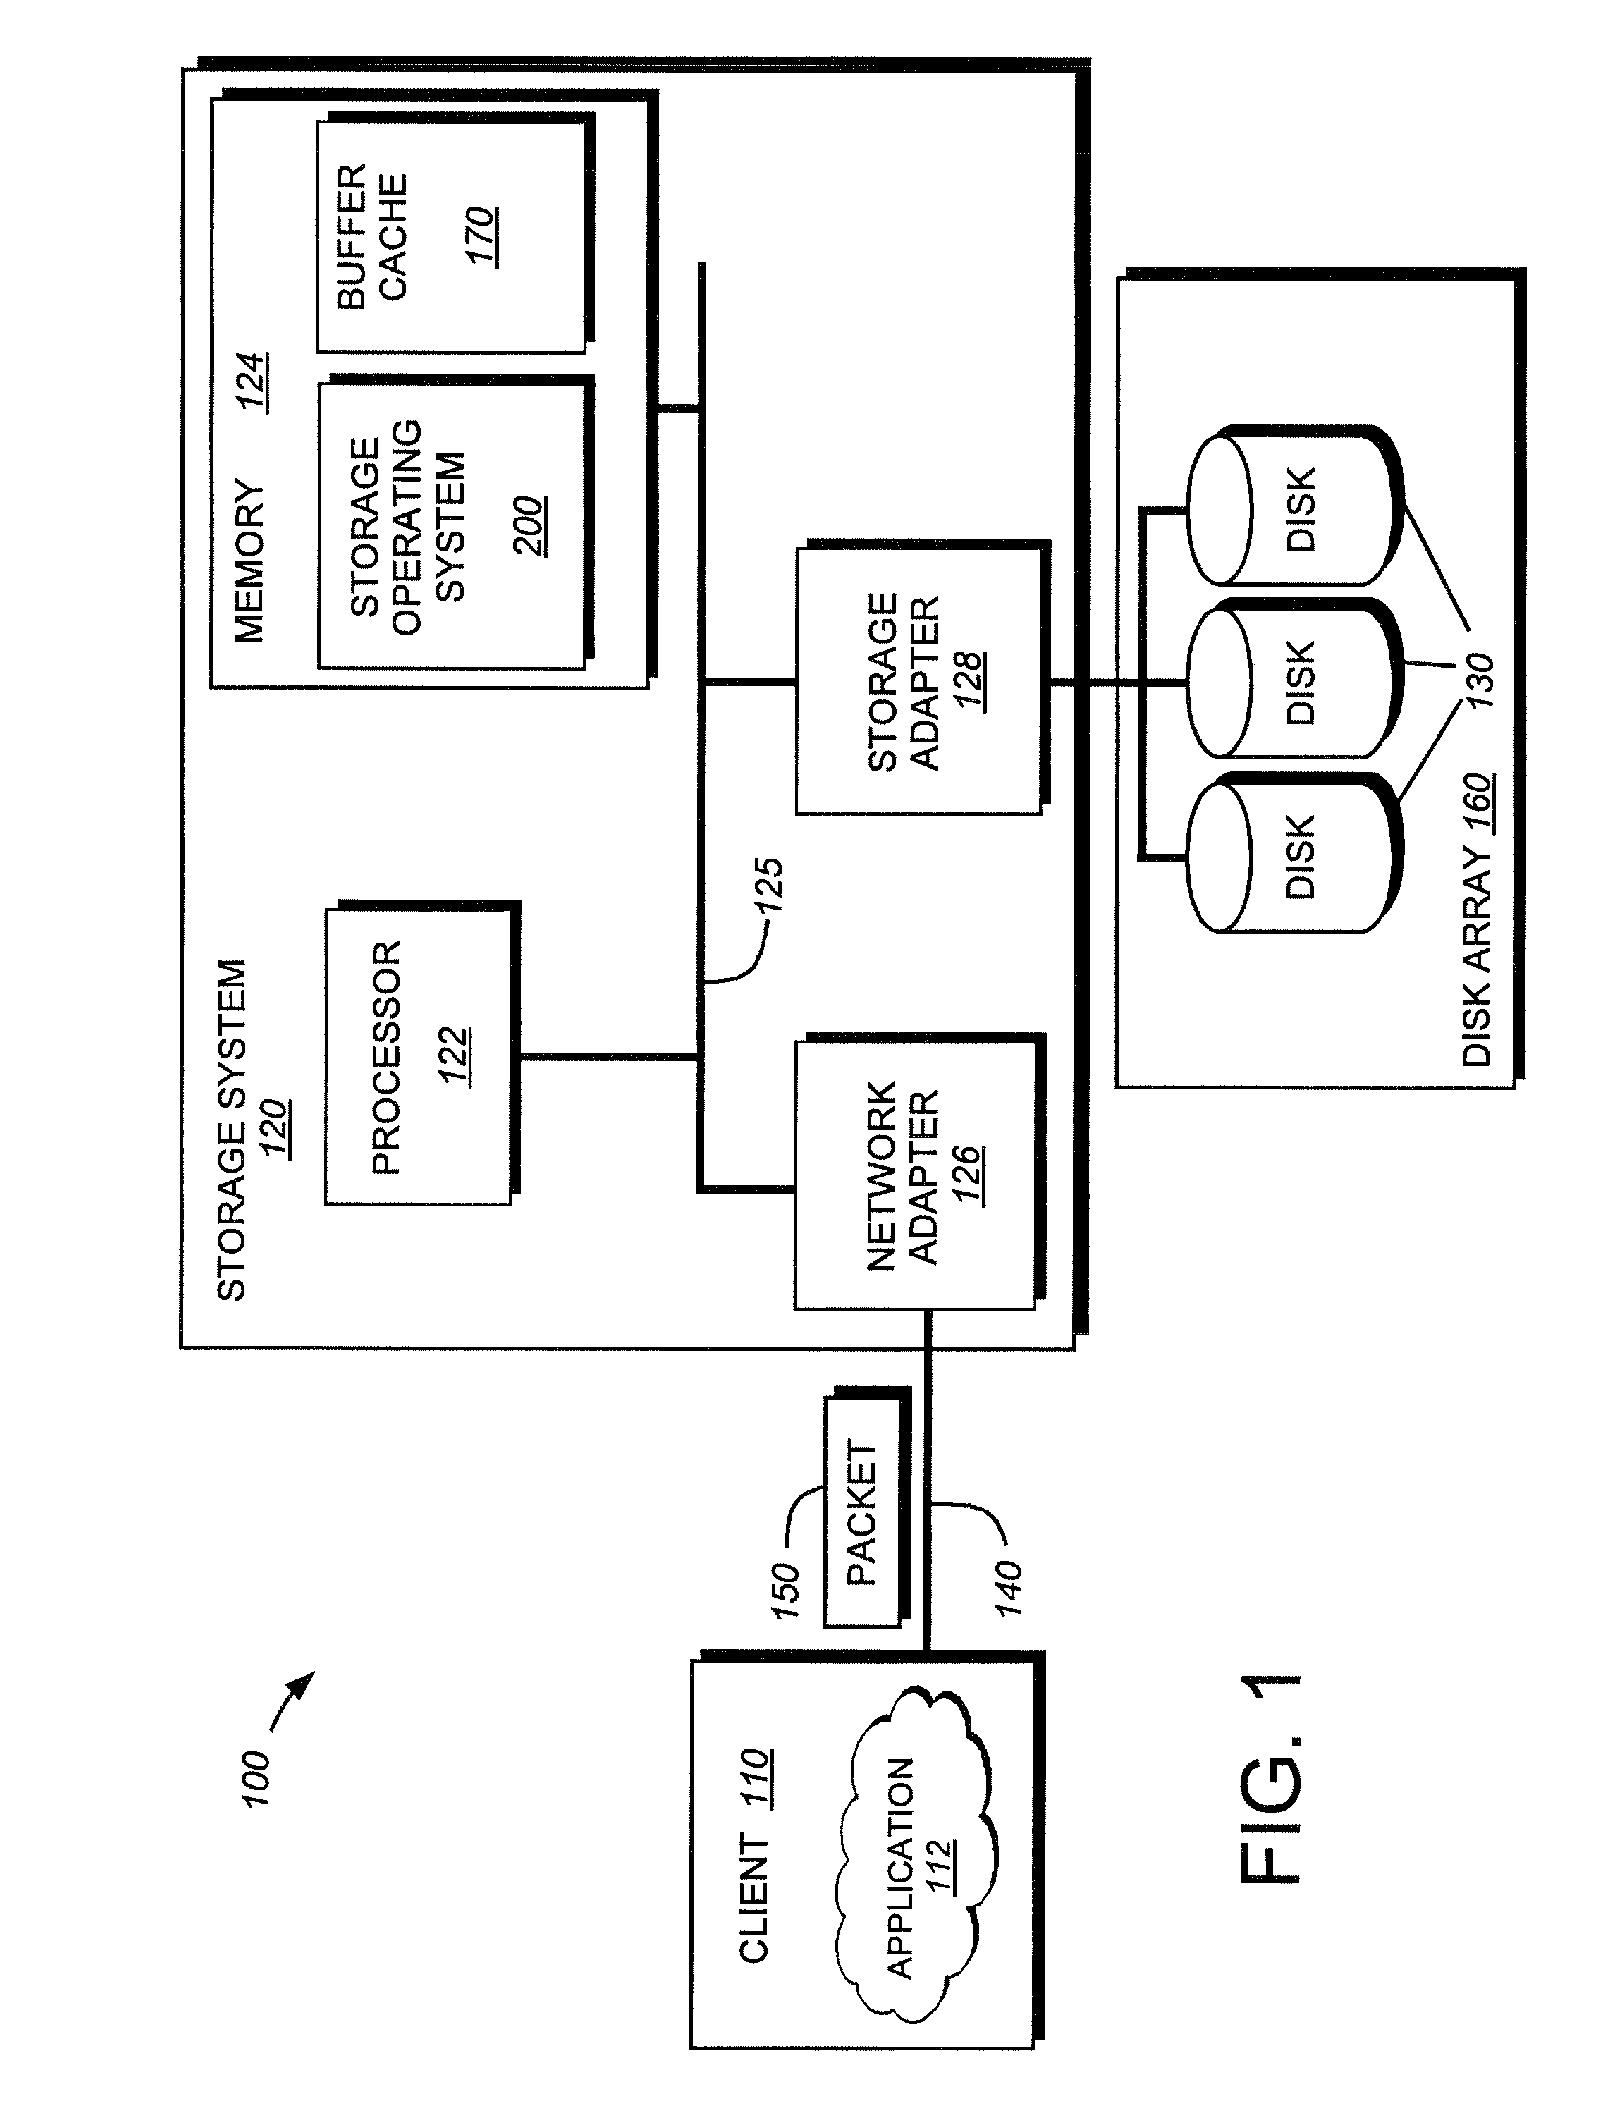 System and method for on-the-fly elimination of redundant data